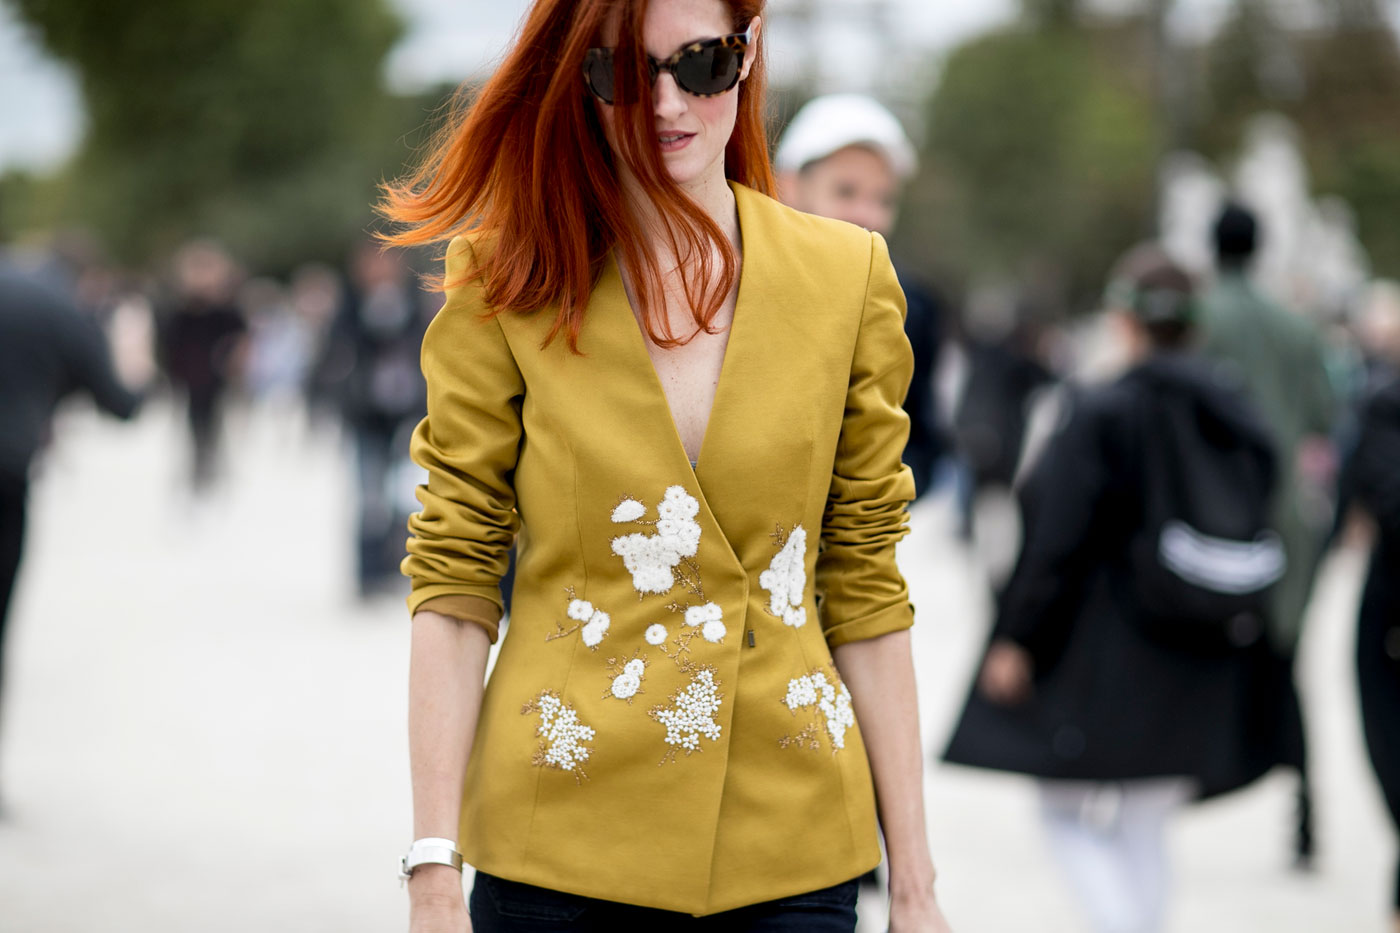 MUSTARD YELLOW: winter's answer to summer's sunny shades...